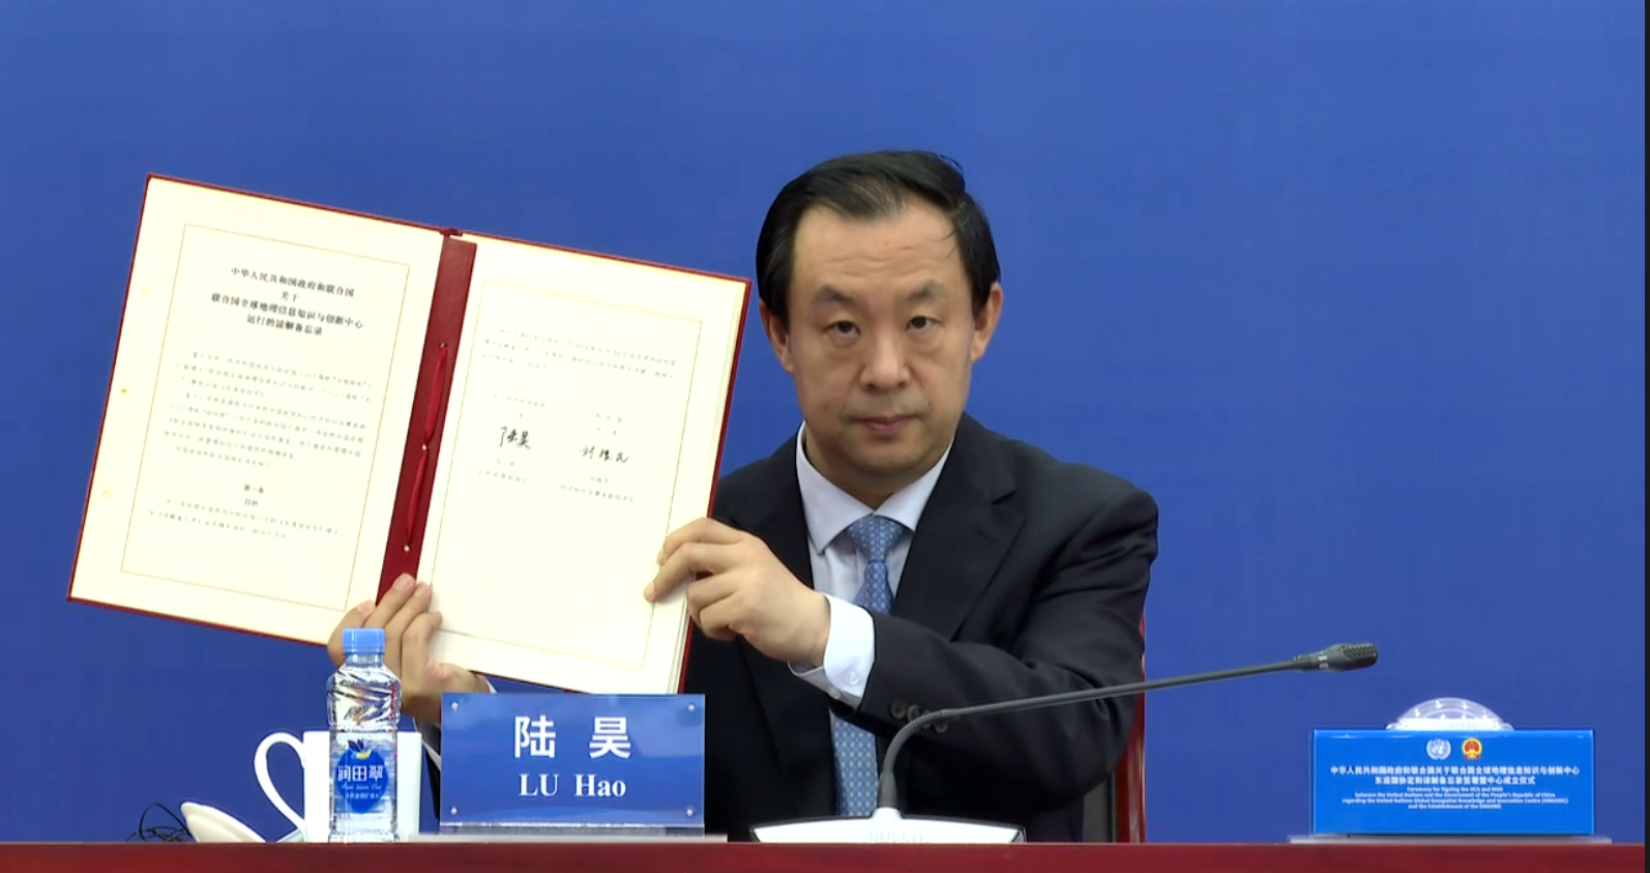 Lu Hao, Minister of Natural Resources